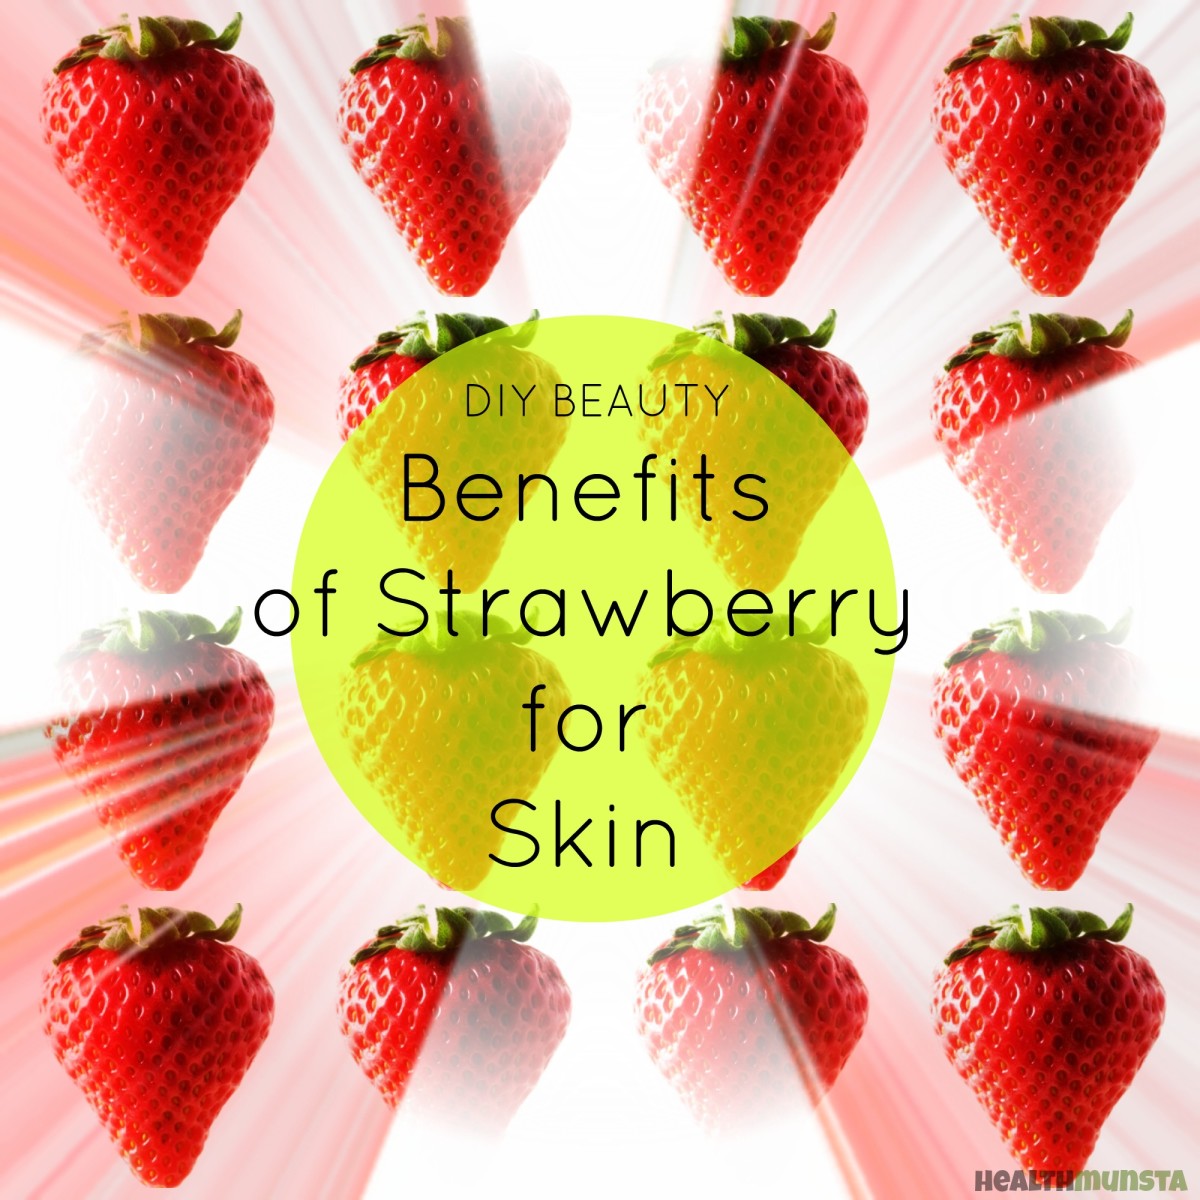 top 5 benefits of strawberry for skin | bellatory